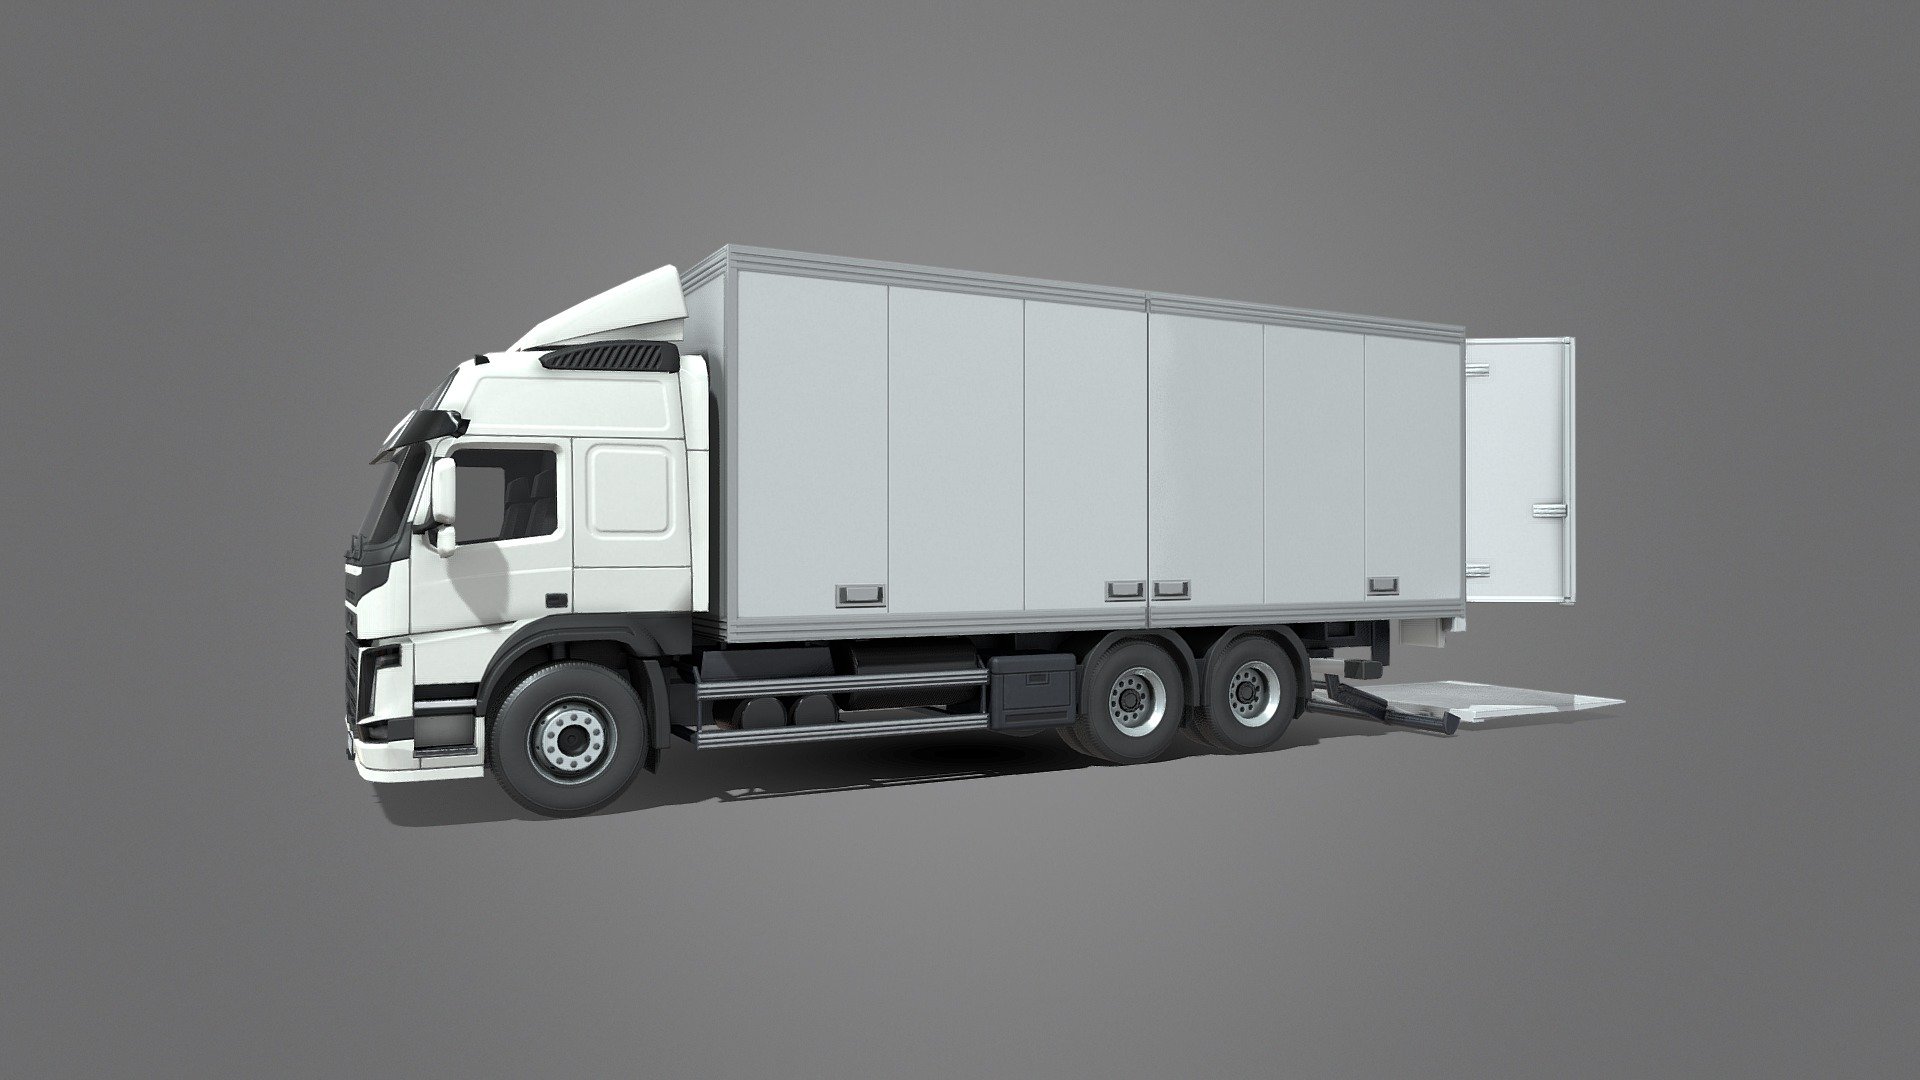 PBR low-poly 3D model of Medium Size Box Truck. The interior part is also modeled.

The back door opens and the elevator can move up and down. 

This 3d model is best for use in games and other real-time applications such as Unity or Unreal Engine.   

You can also get this model in a bundle: https://skfb.ly/oIMFu

Technical details:




7 PBR textures sets 
(Main Body, Interior, Wheels, Cargo, Interior Cargo, License Plates, Windows) 

9606 Triangles 

10539  Vertices

The model is divided into few objects to suit animation process.

There is also collapsed version of the object (one mesh).

Pivot points are correctly placed to suit optional animation process. 

Lot of additional files and Blender sample scenes included (Unity, UE4, Blender, Maya etc.)

More file formats are available in additional zip file on product page.  

Please feel free to contact me if you have any questions or need any support for this asset.

Support e-mail: support@rescue3d.com - Box Truck - Buy Royalty Free 3D model by Rescue3D Assets (@rescue3d) 3d model